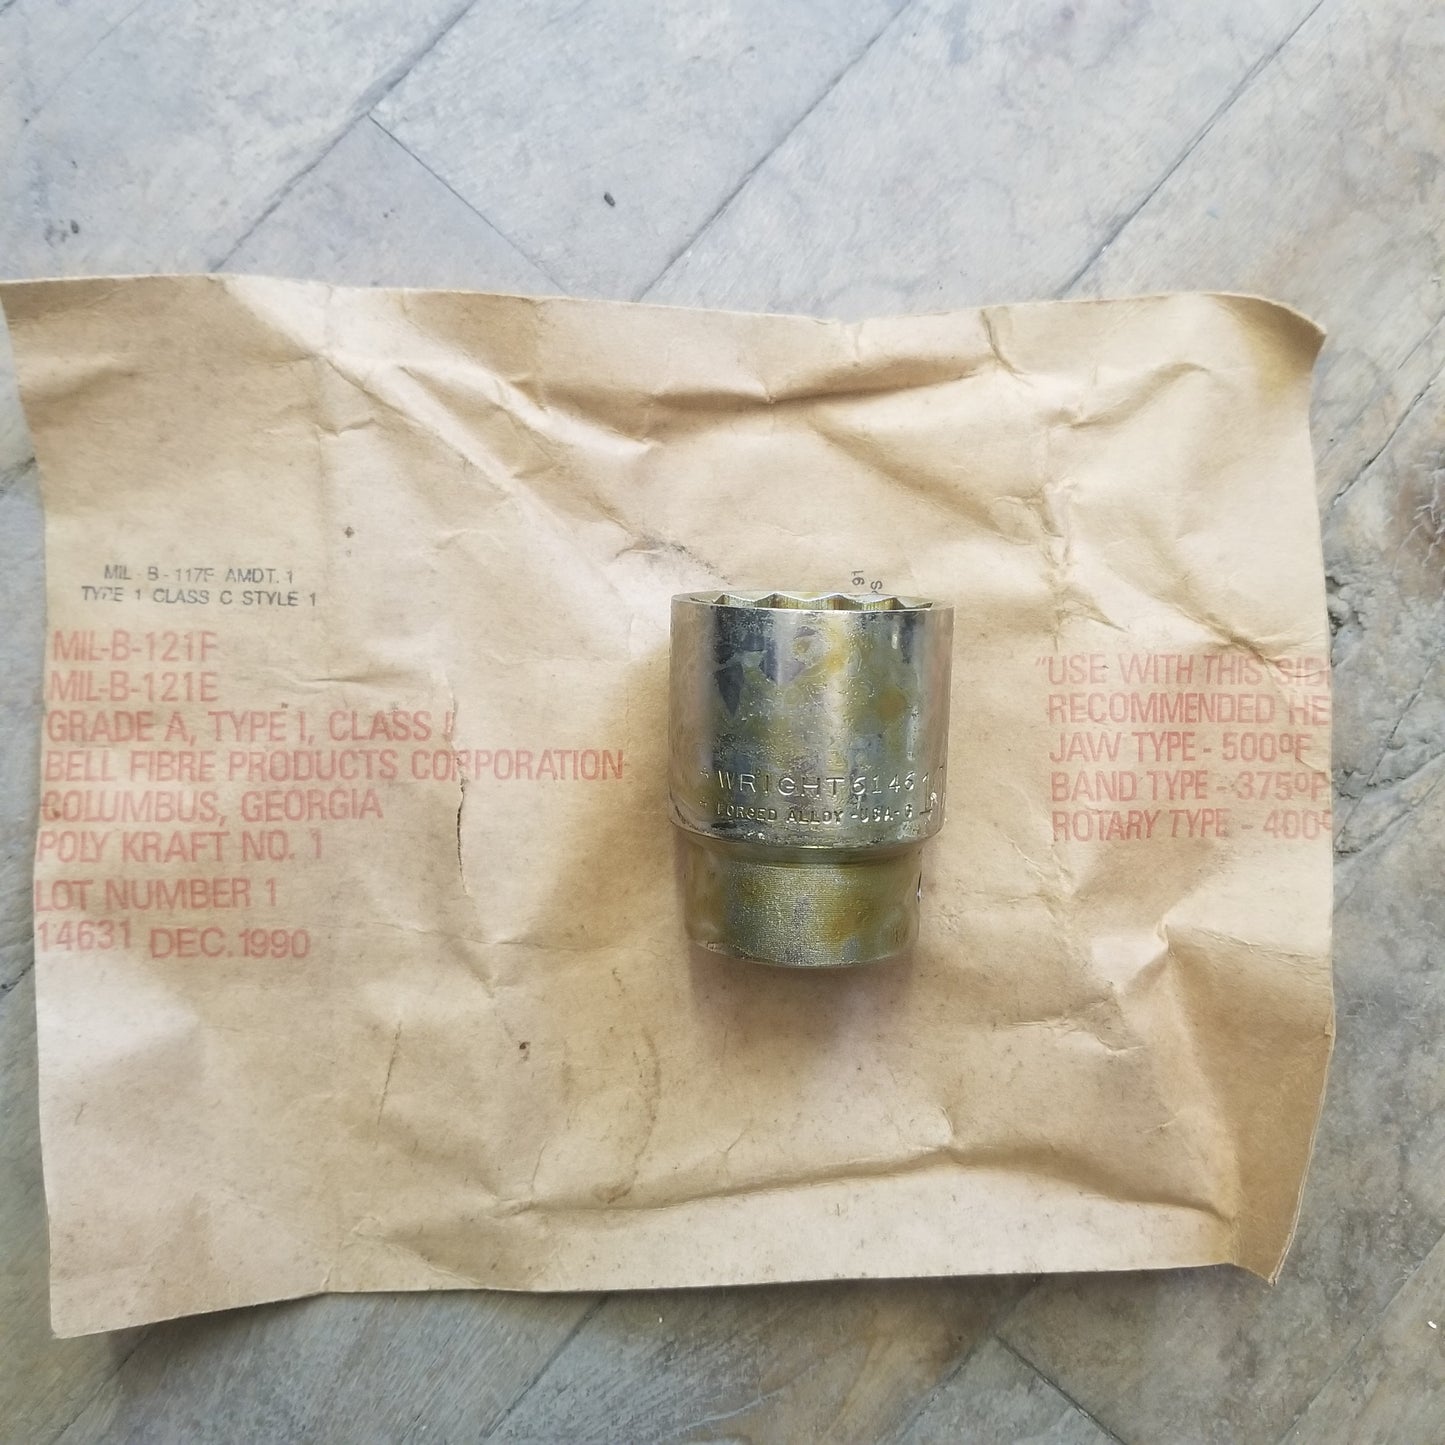 Wright 3/4" Drive 12 Point 1 7/16" Socket (6146WRAF)